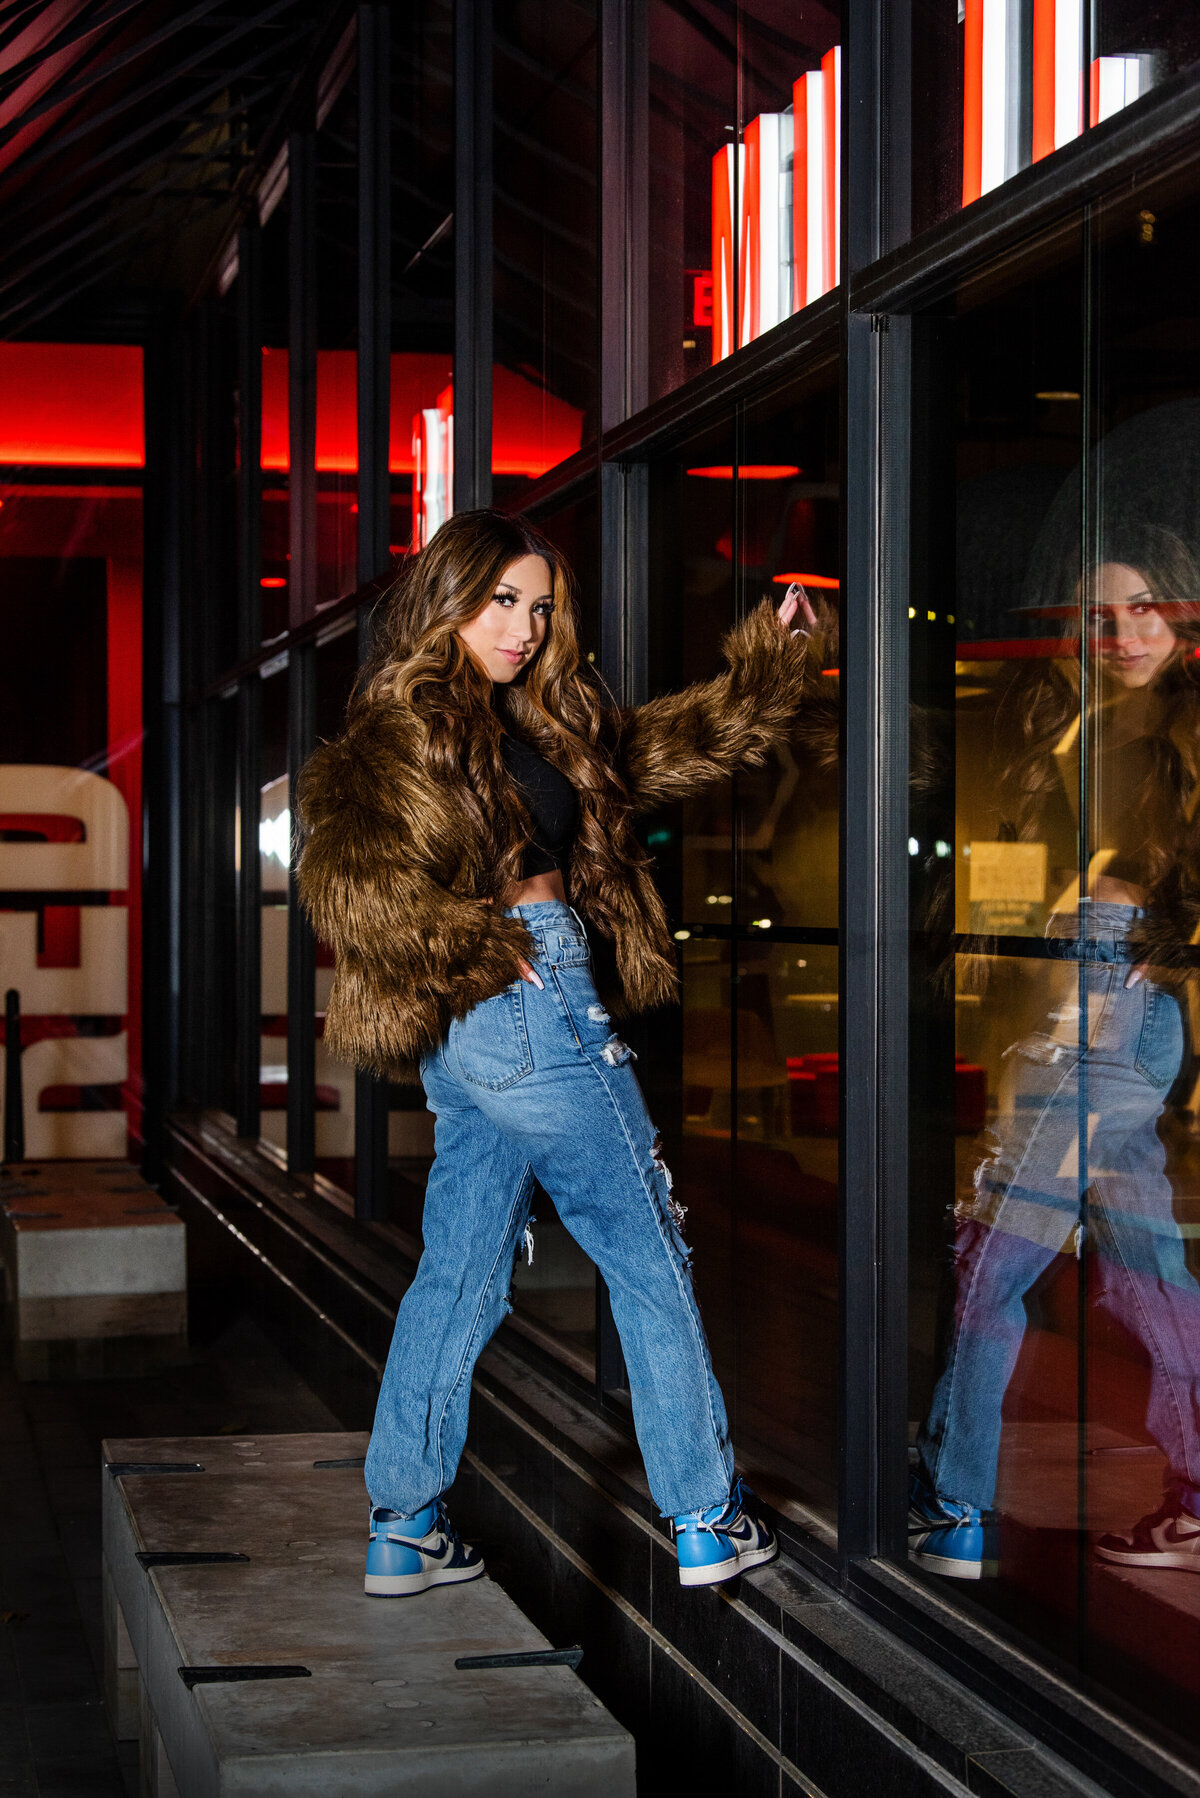 senior girl in jeans and fashion fur coat leaning against glass in urban setting